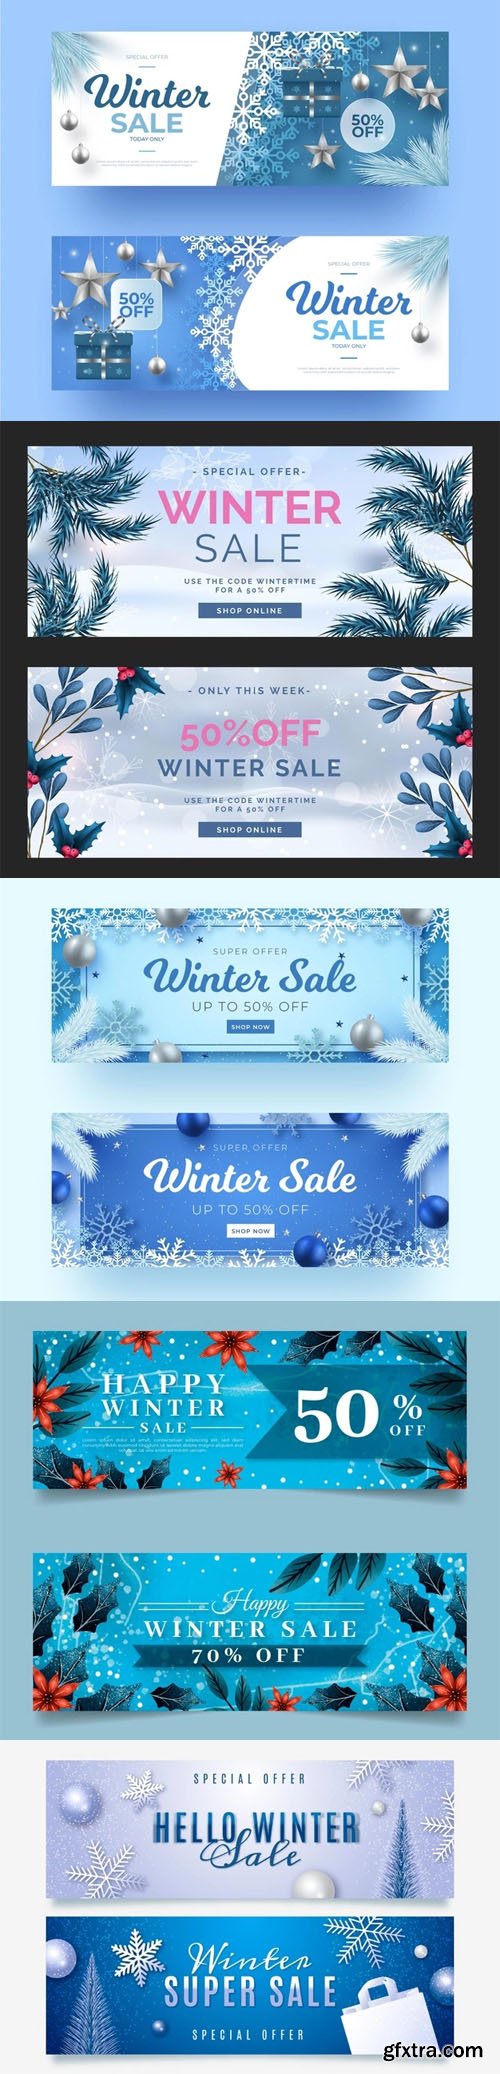 10+ Winter Sale Banners Vector Collection